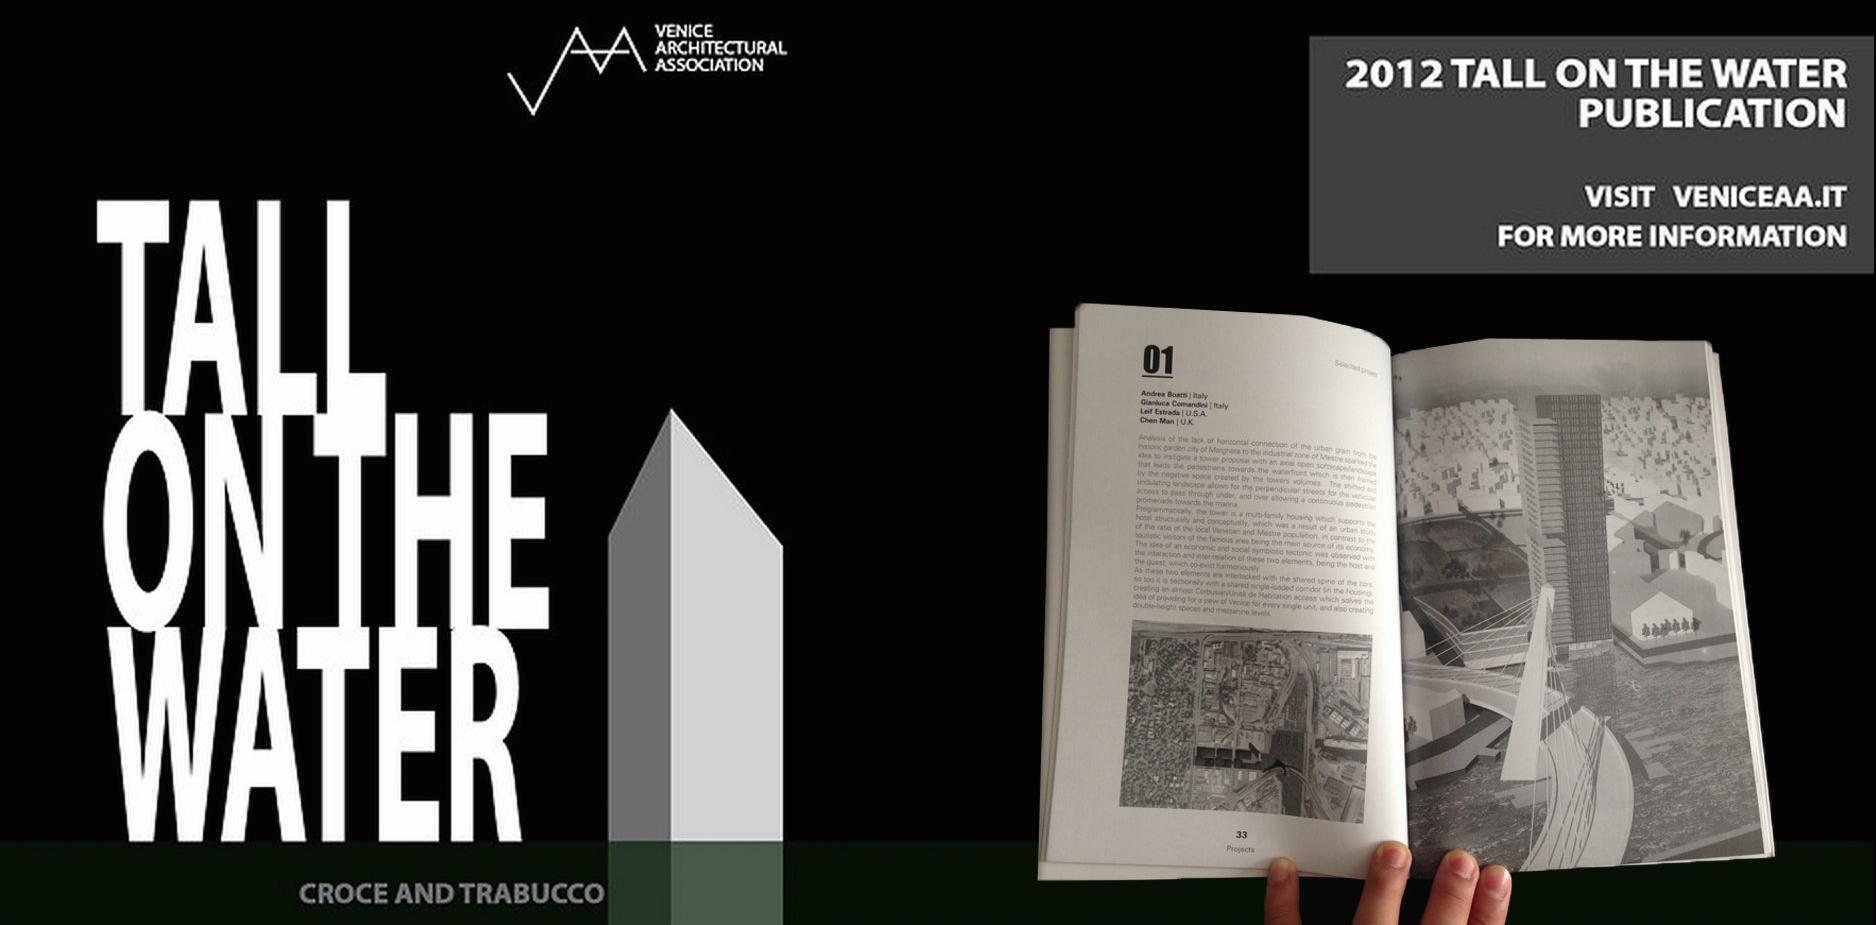 2012 Tall on the Water Publication Released (Venice Architectural Association)